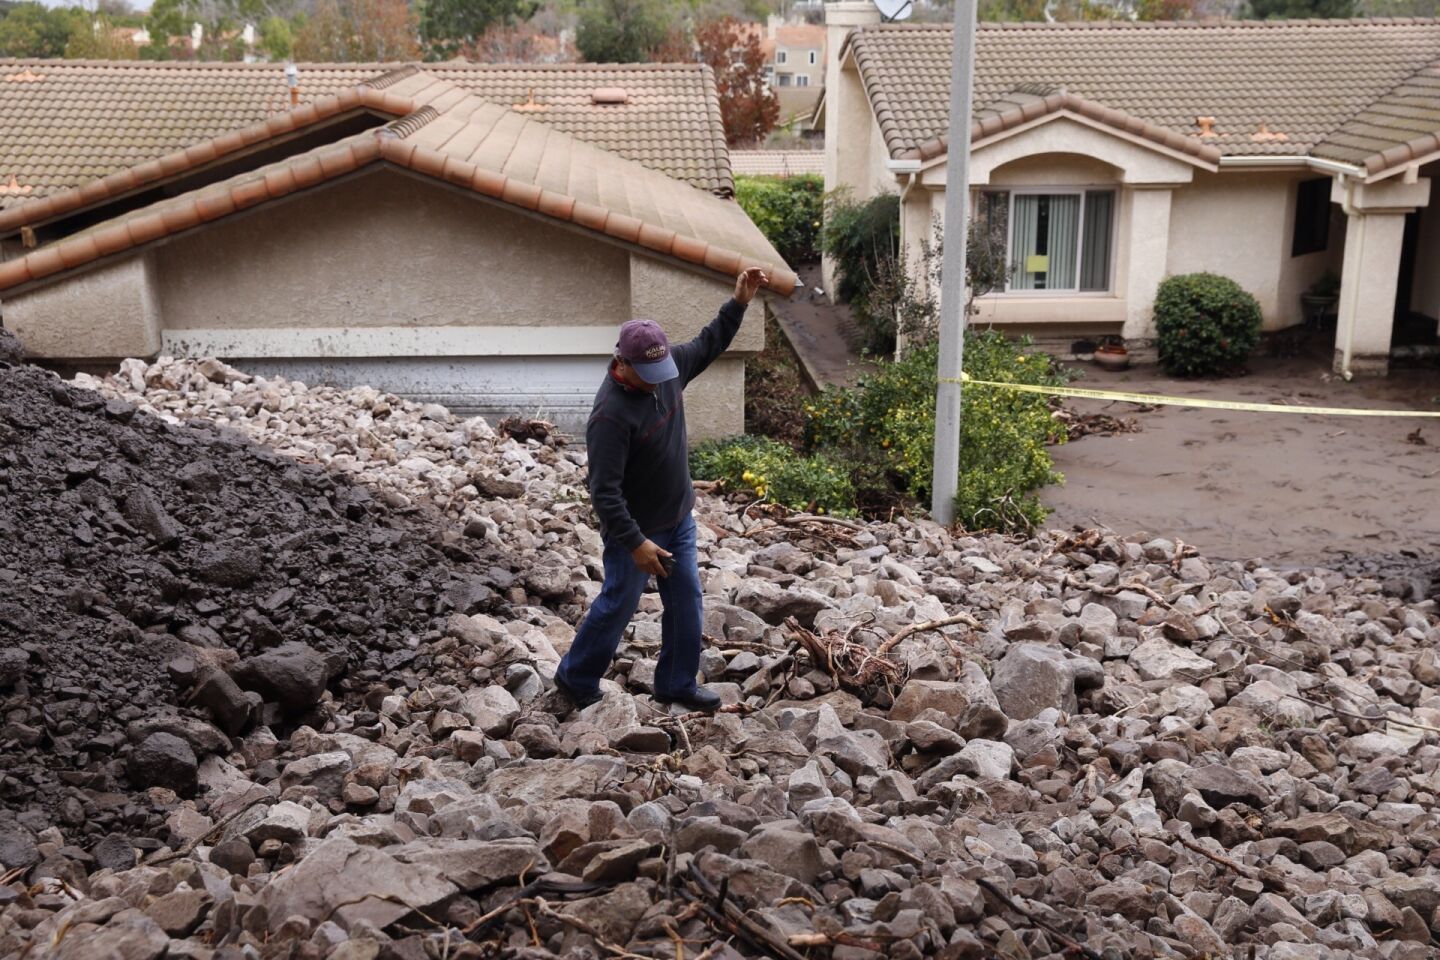 Erwin Fodram, a 20-year resident, looks at homes on Gitana Avenue buried by the debris flow in Camarillo Springs.